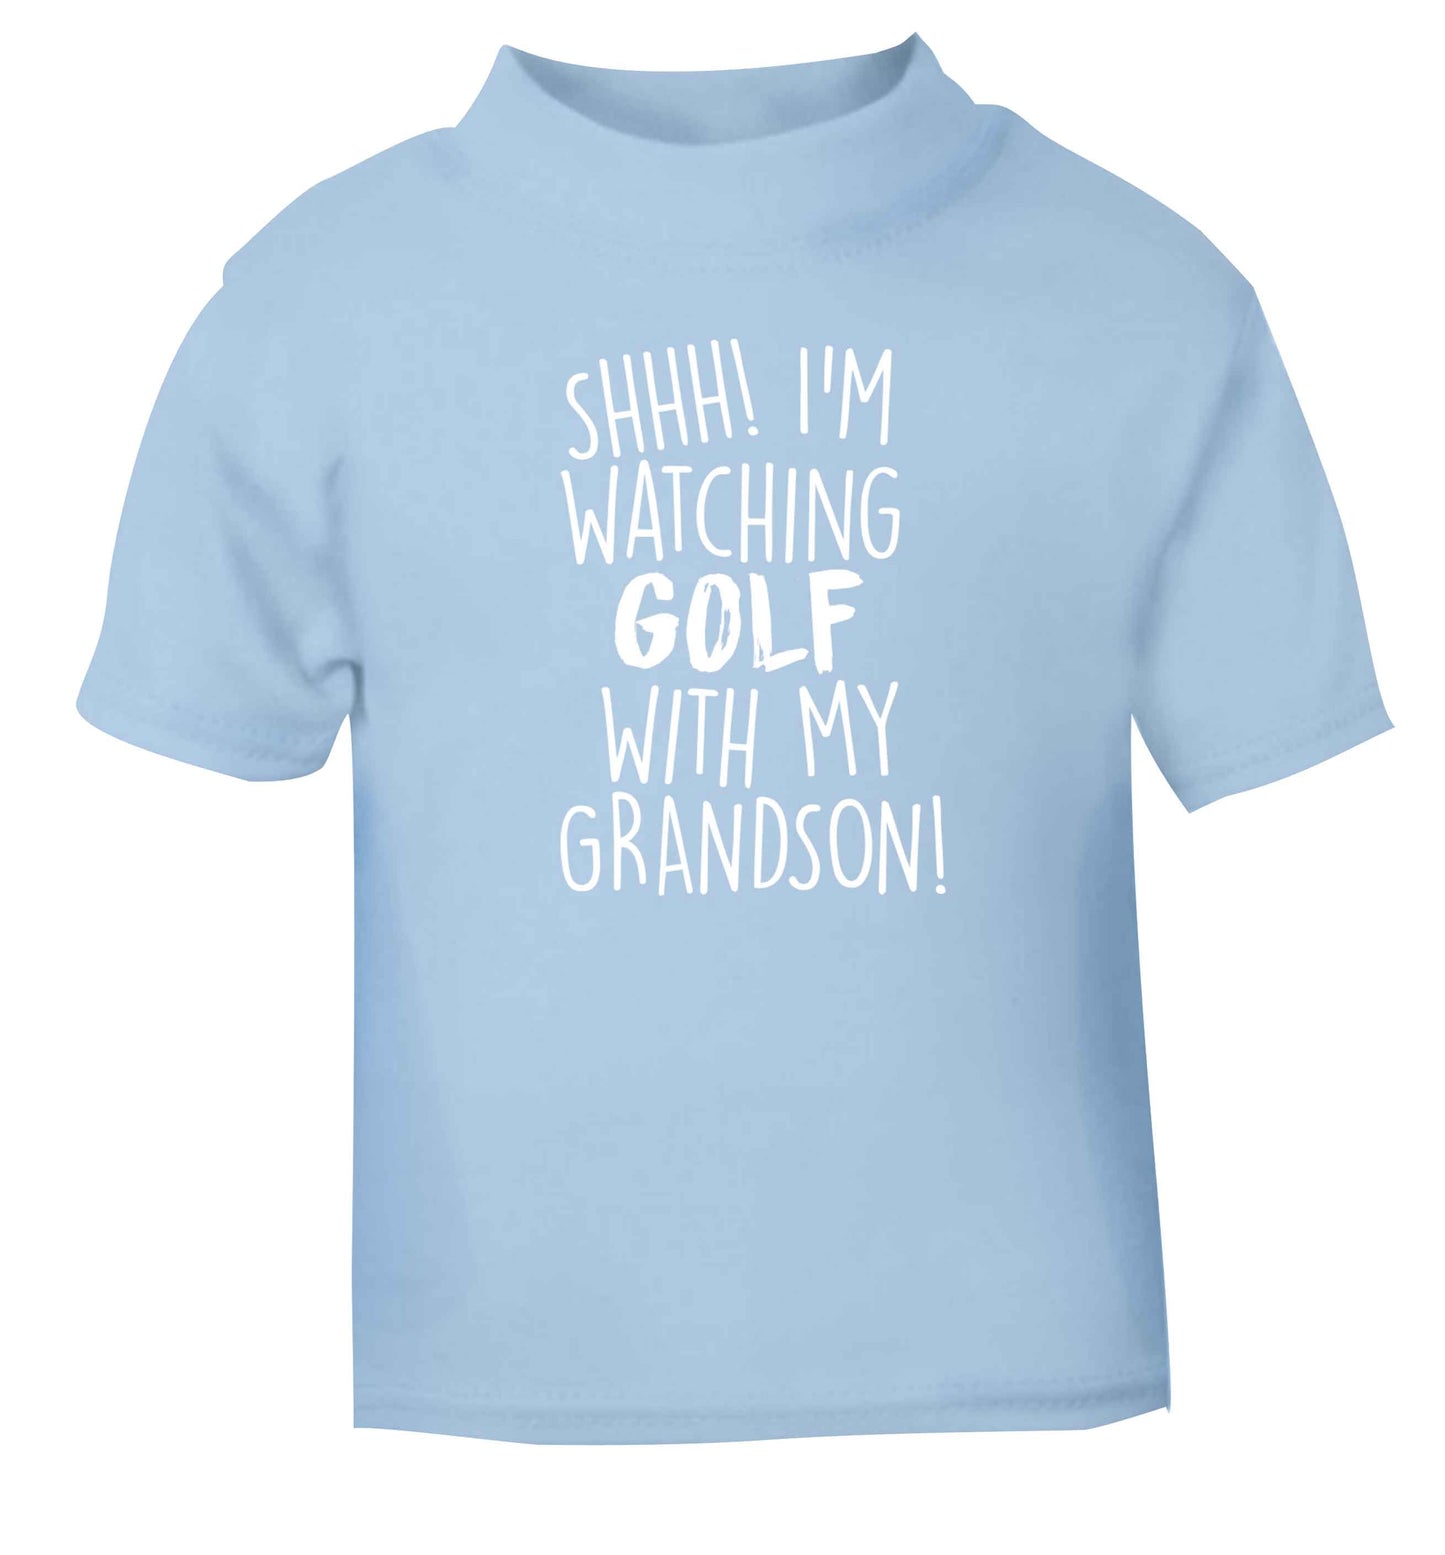 Shh I'm watching golf with my grandsonlight blue Baby Toddler Tshirt 2 Years